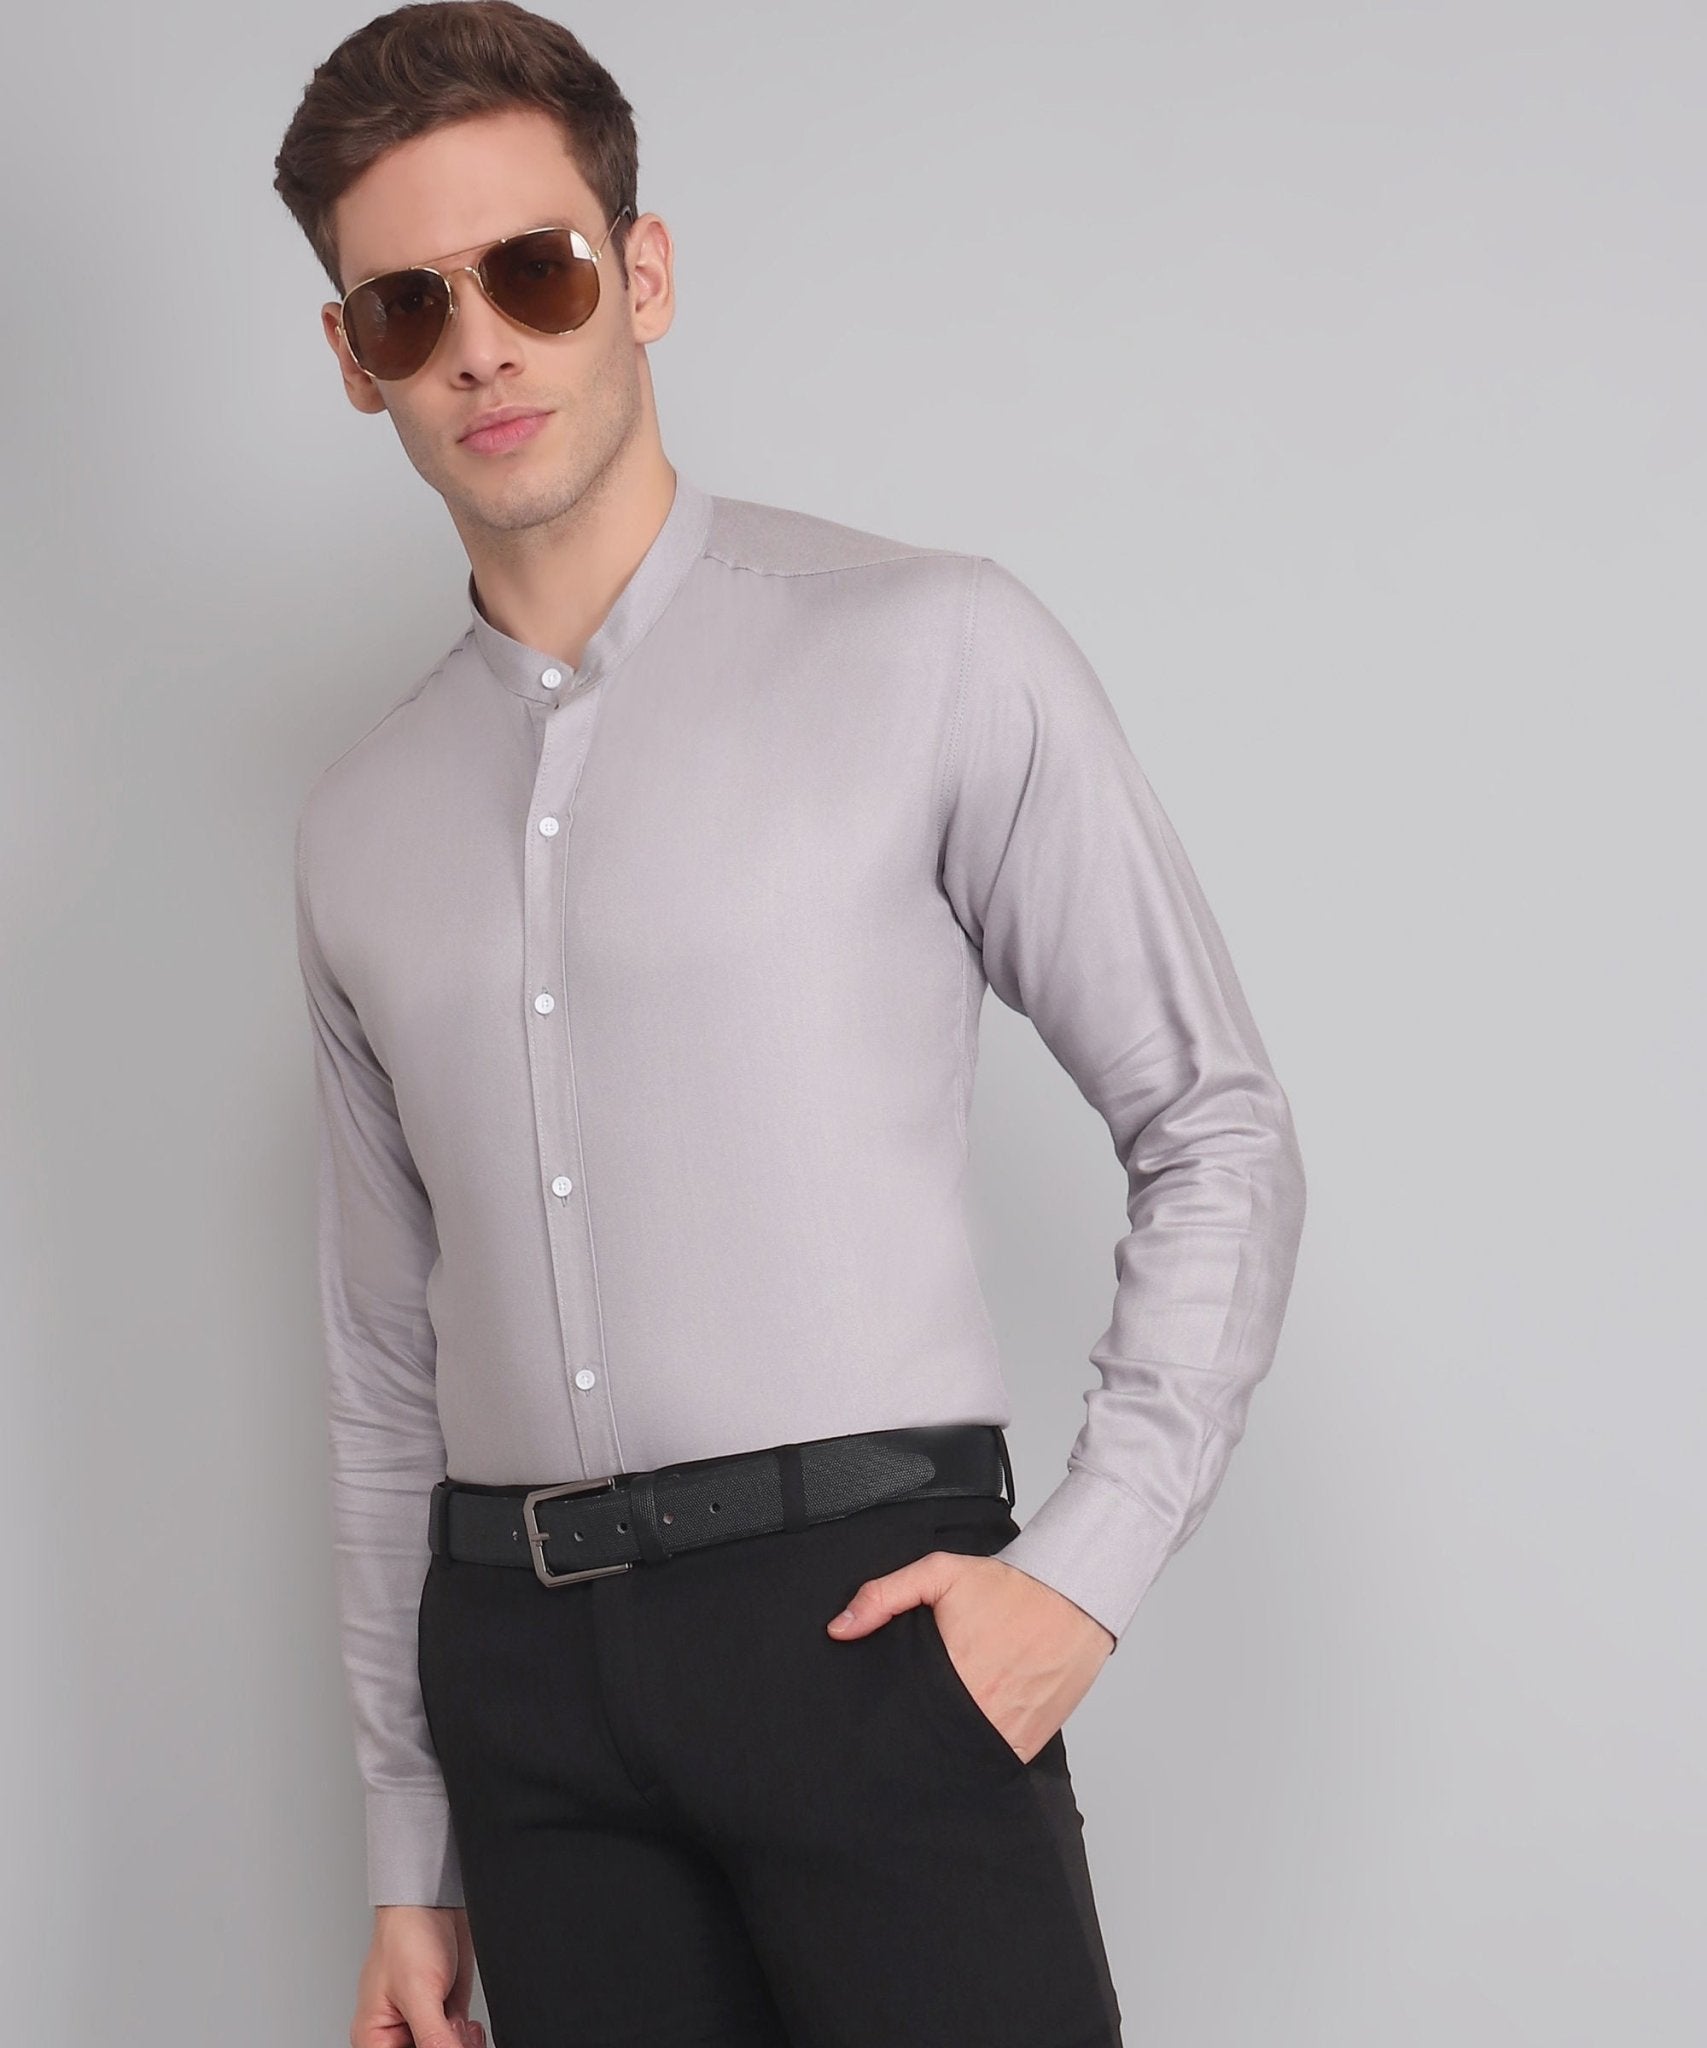 TryBuy Premium Luxurious Full Sleeves Mandarin Collar Silver Cotton Casual Shirt for Men - TryBuy® USA🇺🇸